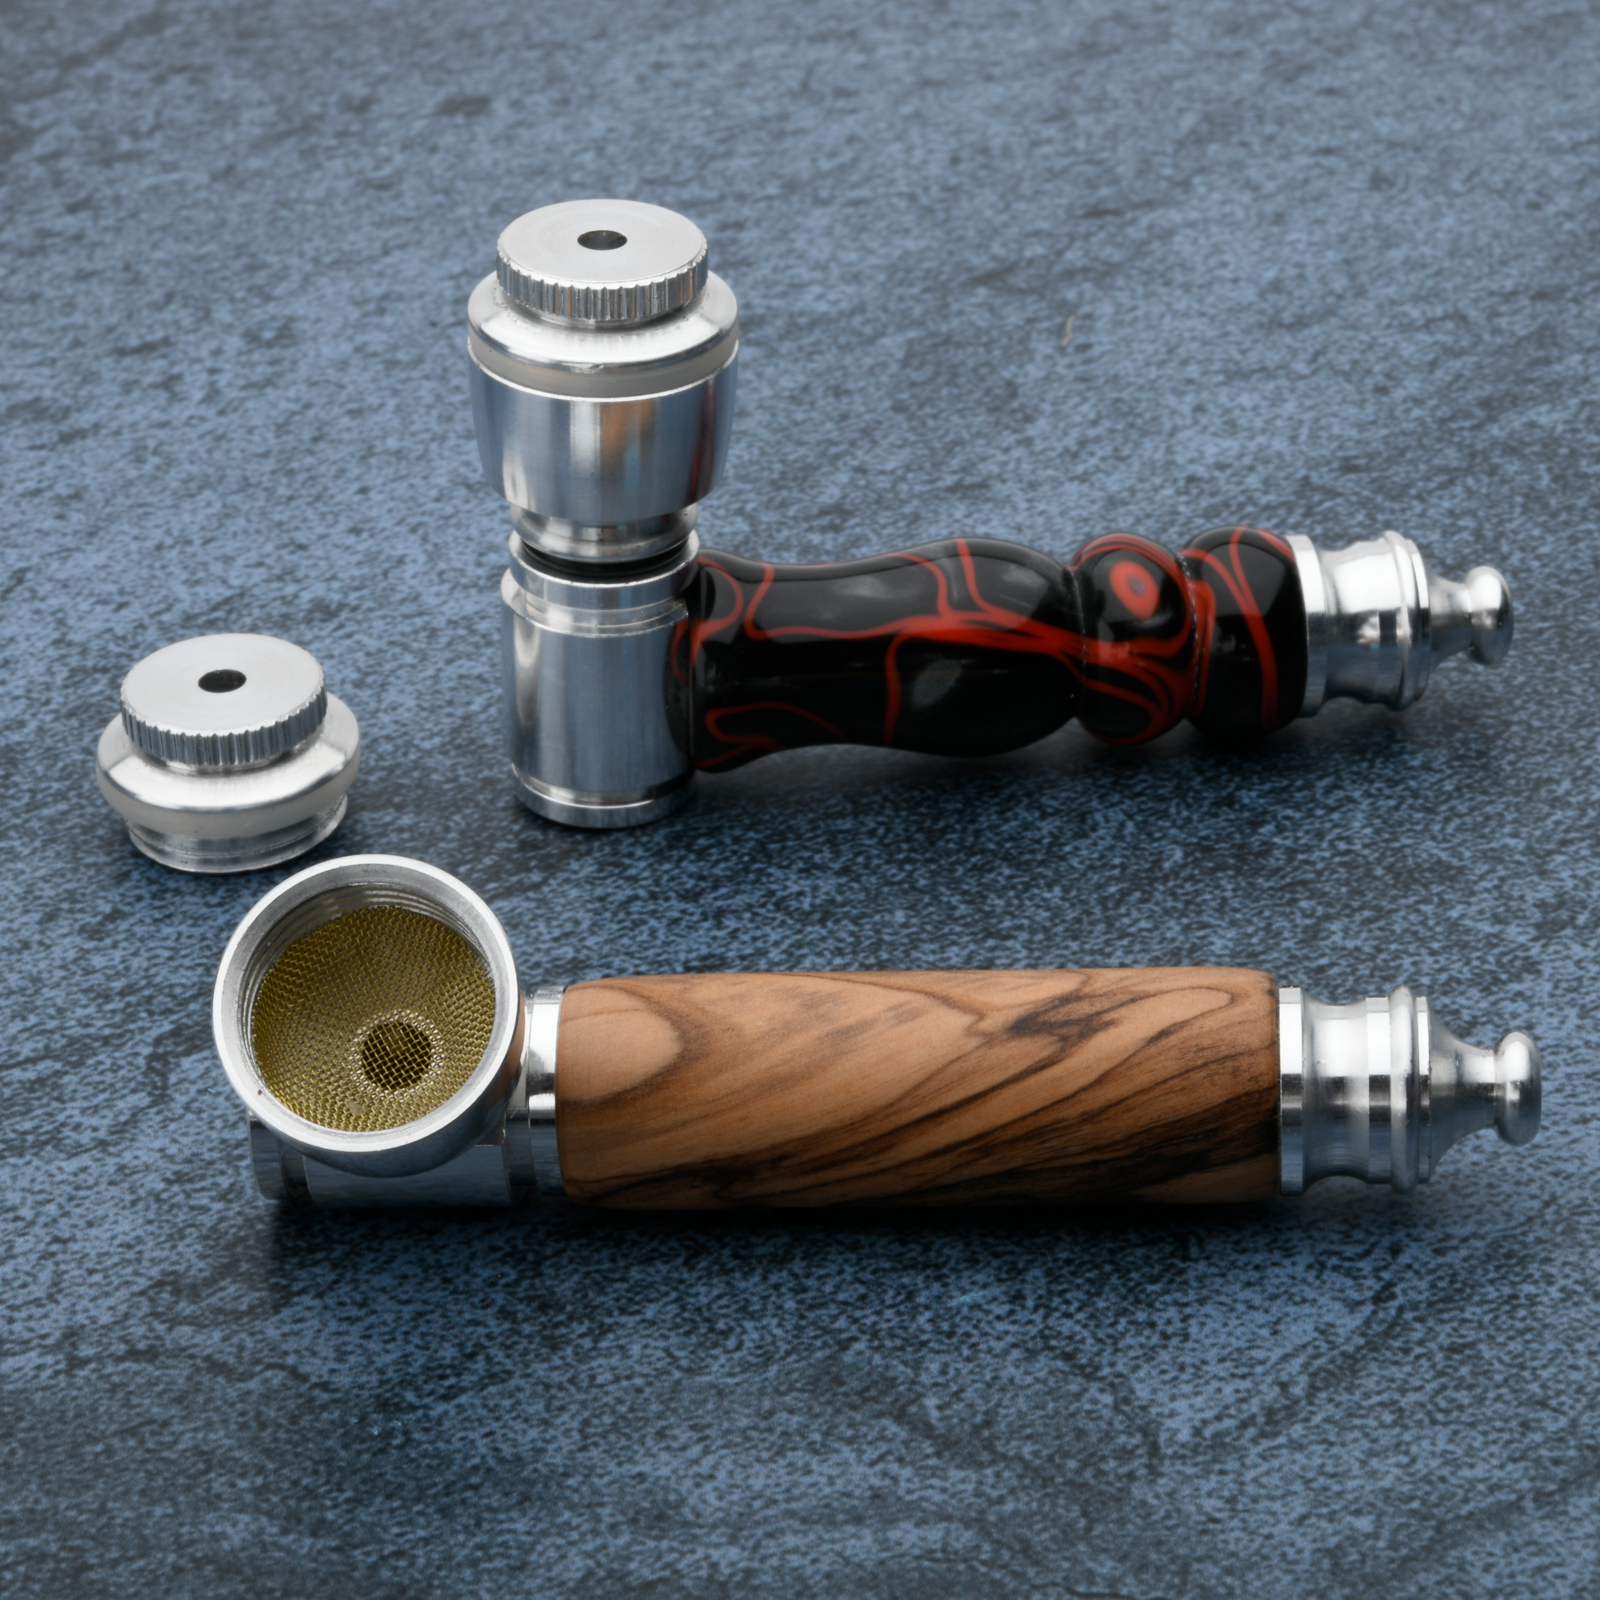 3 Piece Metal Smoking Pipe For Weed